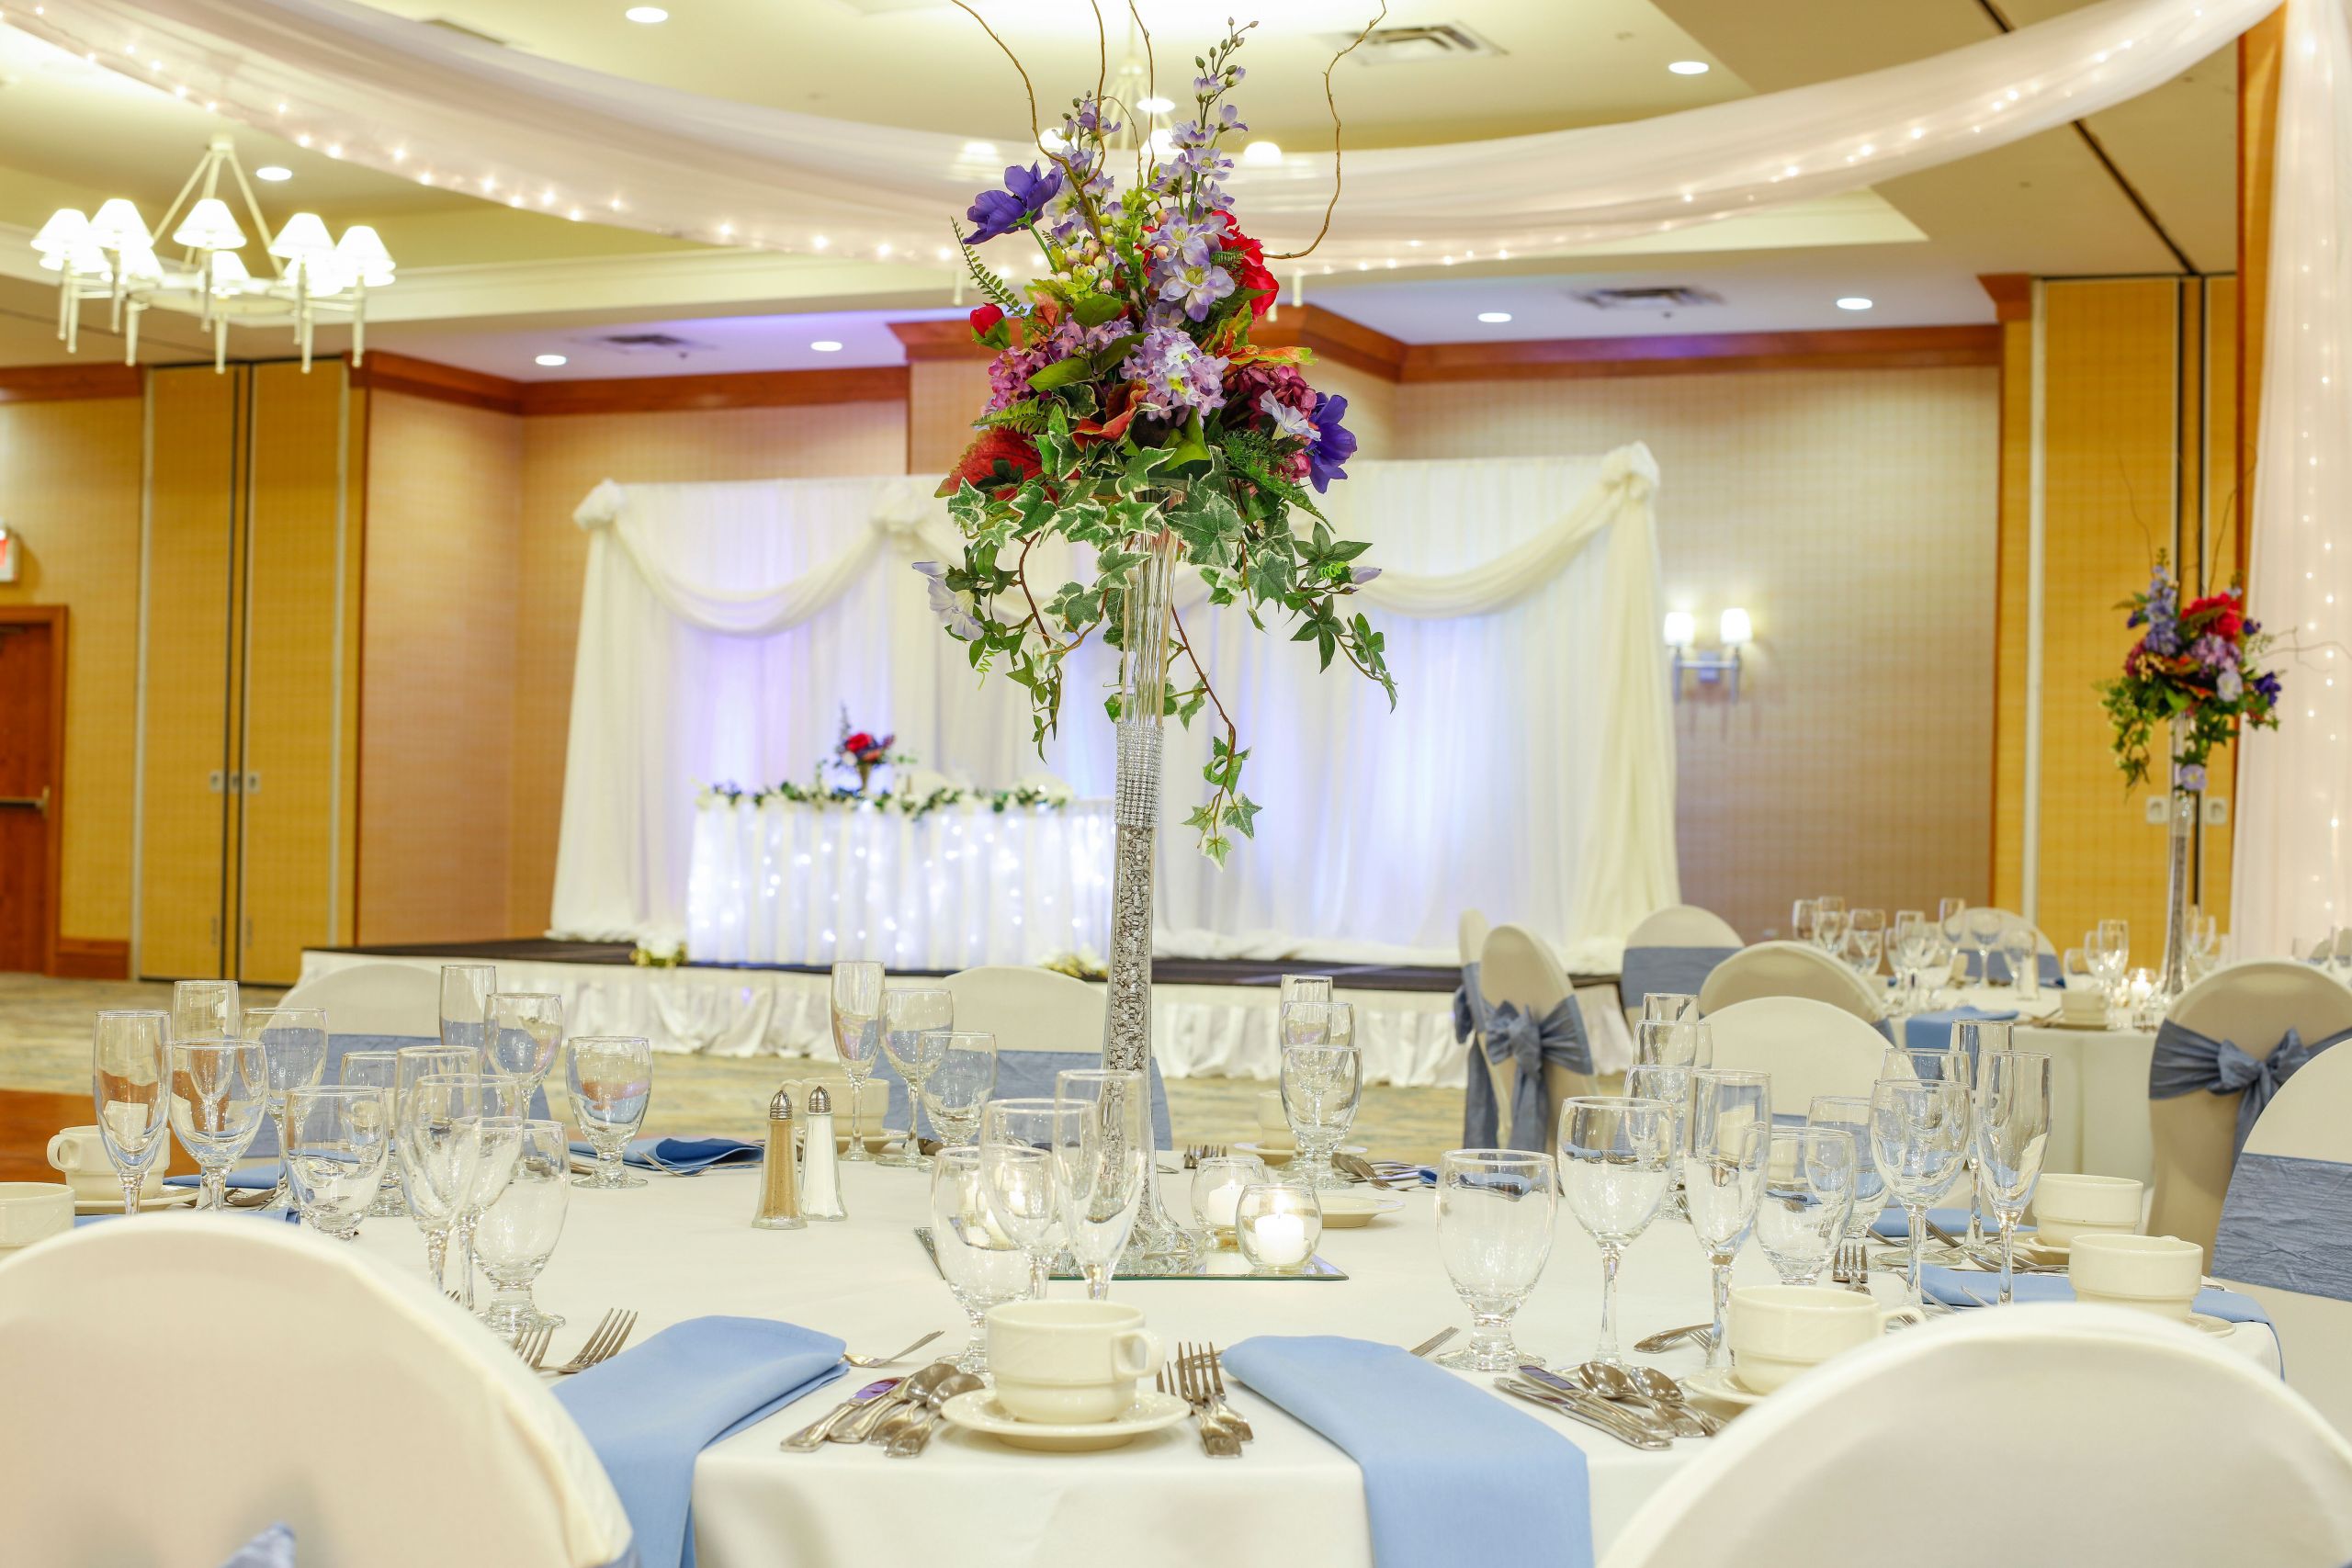 Wedding Venues Rochester Ny
 DoubleTree by Hilton Hotel Rochester